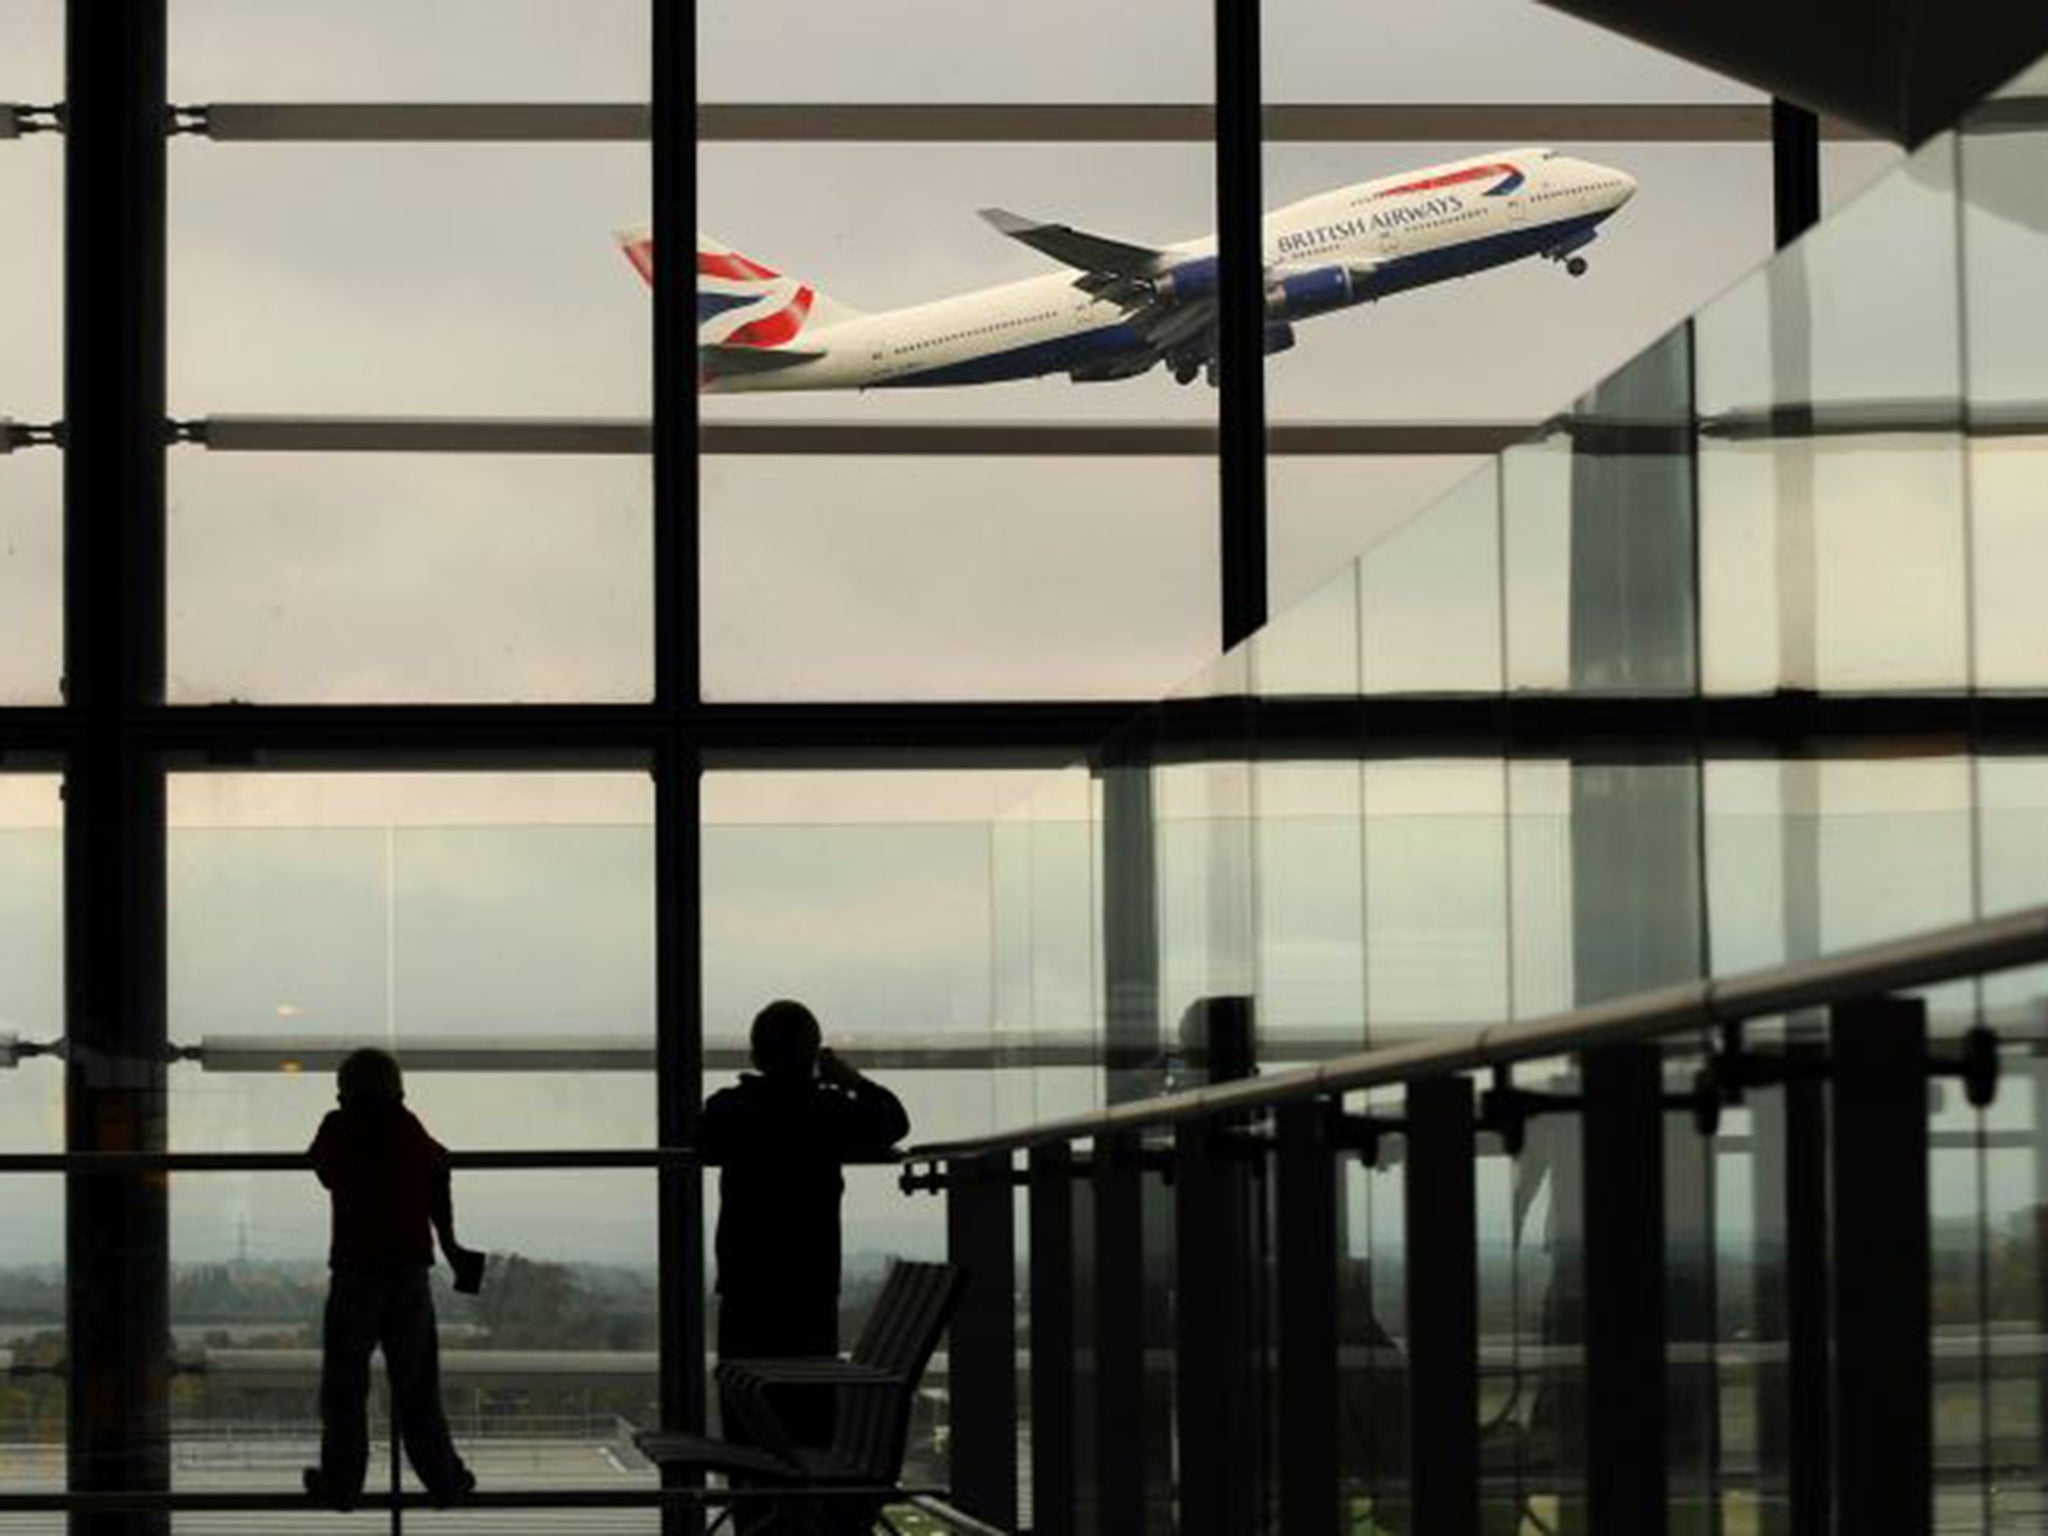 A record 5.95 million passengers used Heathrow in March, up 3.4 per cent on the same month last year